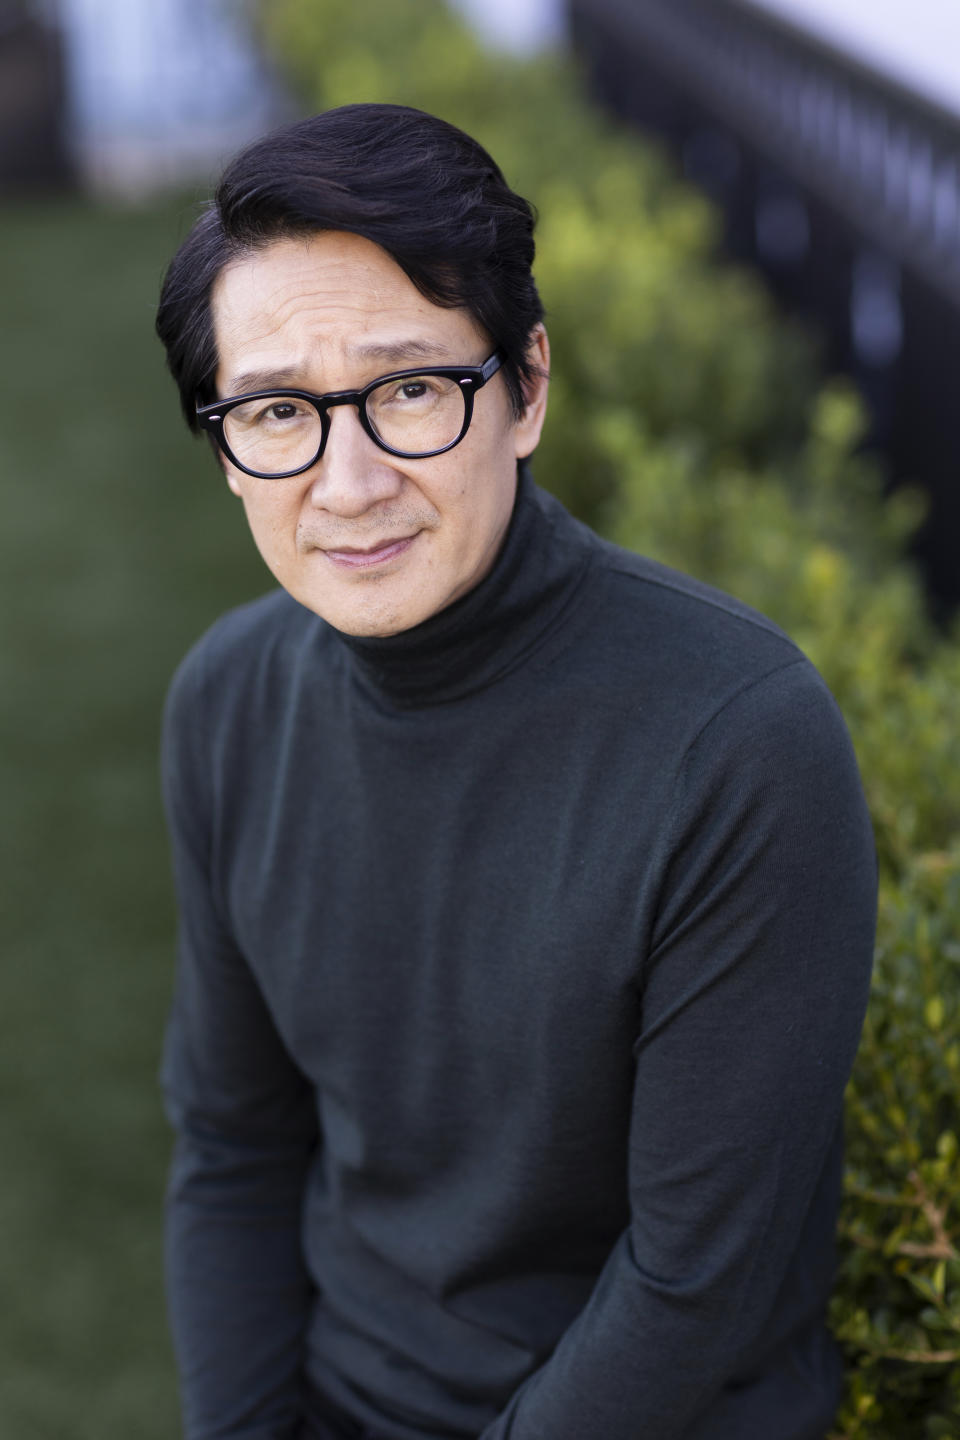 Ke Huy Quan, star of "Everything Everywhere All at Once," poses for a portrait on Sunday, Nov. 20, 2022, at The London Hotel in West Hollywood, Calif. (Photo by Dana Pleasant/Invision/AP)